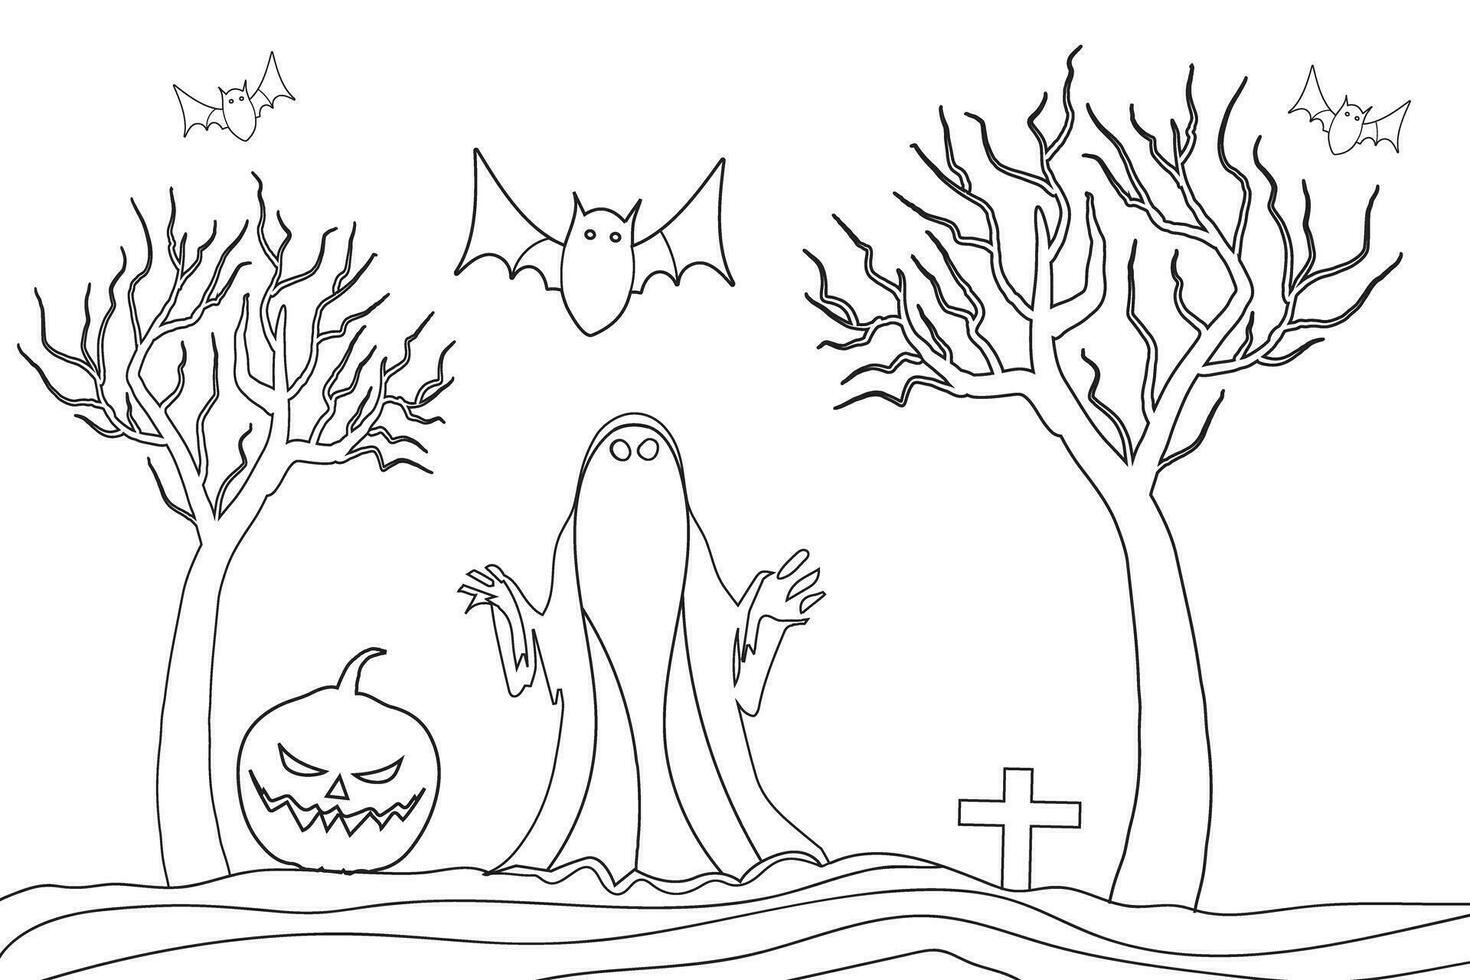 https://static.vecteezy.com/system/resources/previews/029/102/209/non_2x/hand-drawn-outline-hunted-tree-ghost-costume-funny-pumpkins-fly-bat-halloween-theme-landscape-coloring-page-kid-drawing-for-nursery-funny-halloween-coloring-sheets-isolated-humor-backgrounds-vector.jpg